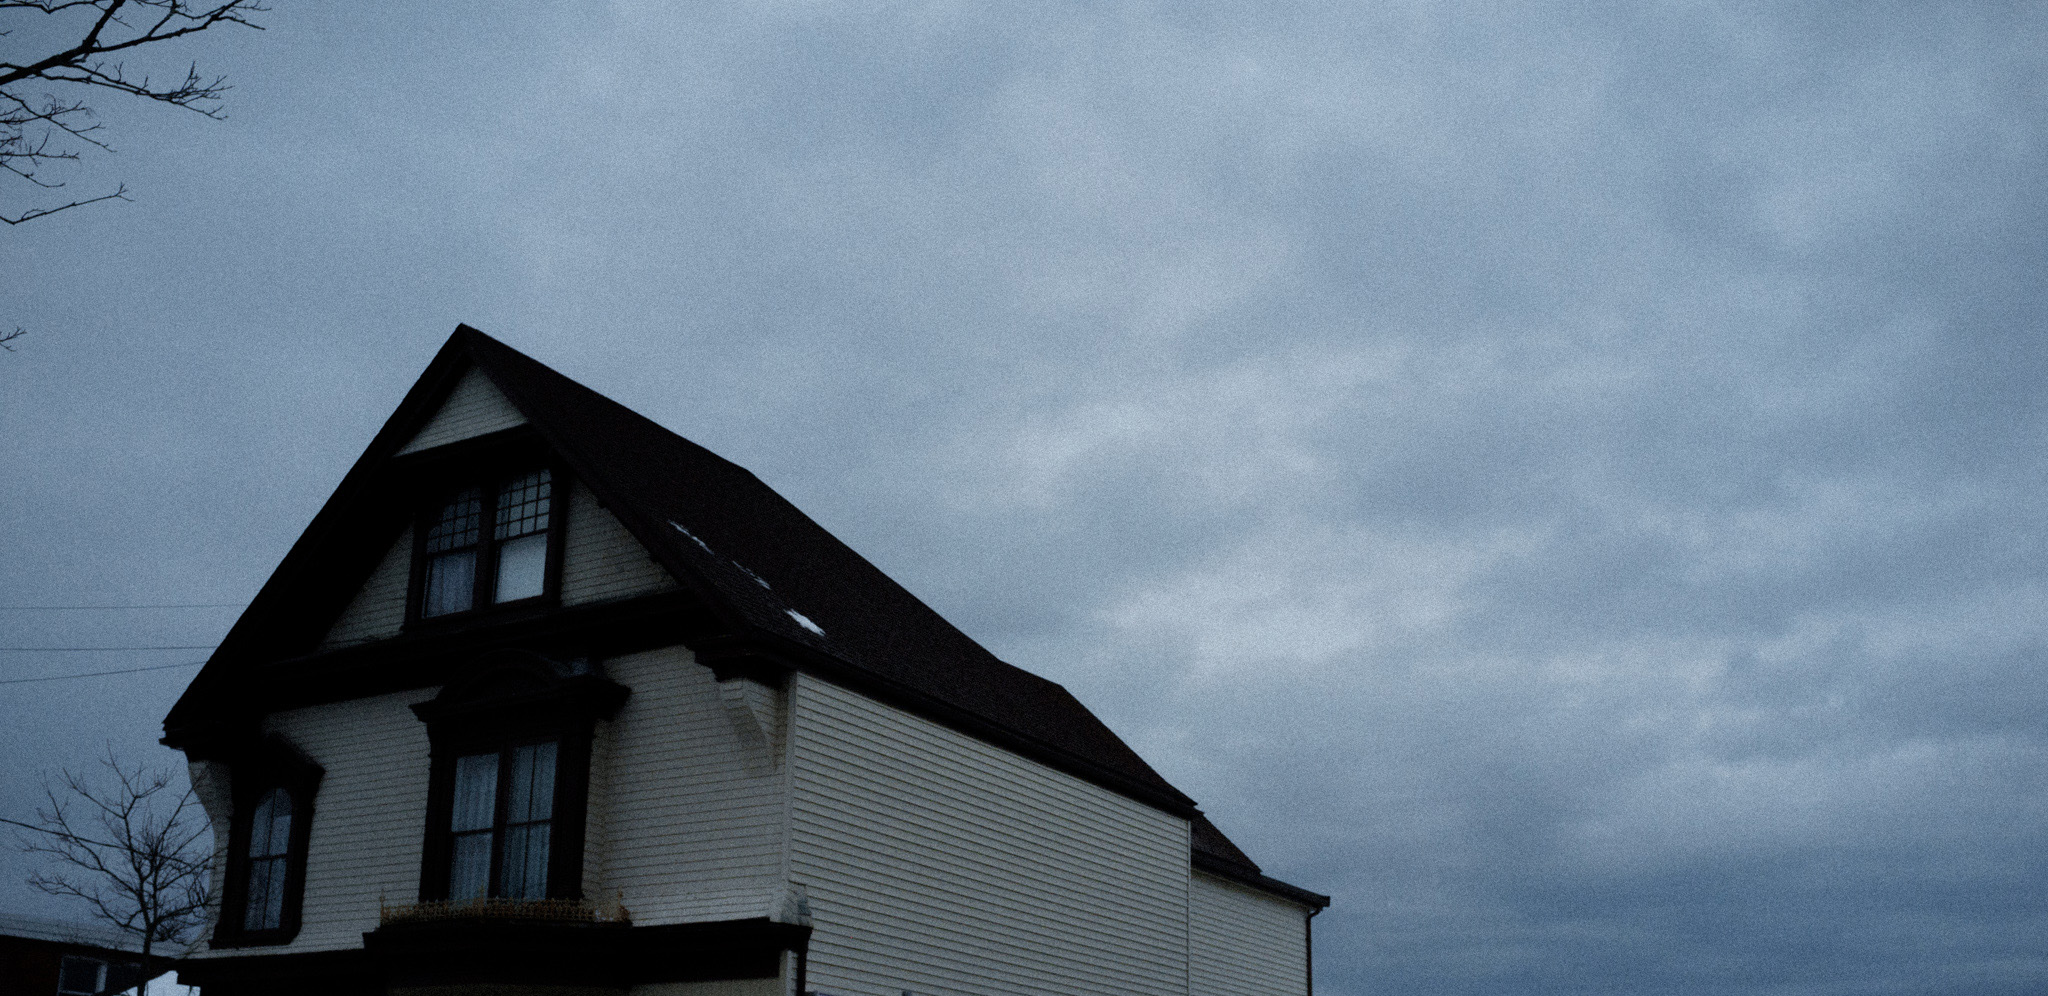 A wood-sided, black-roofed house stands under a grey sky.